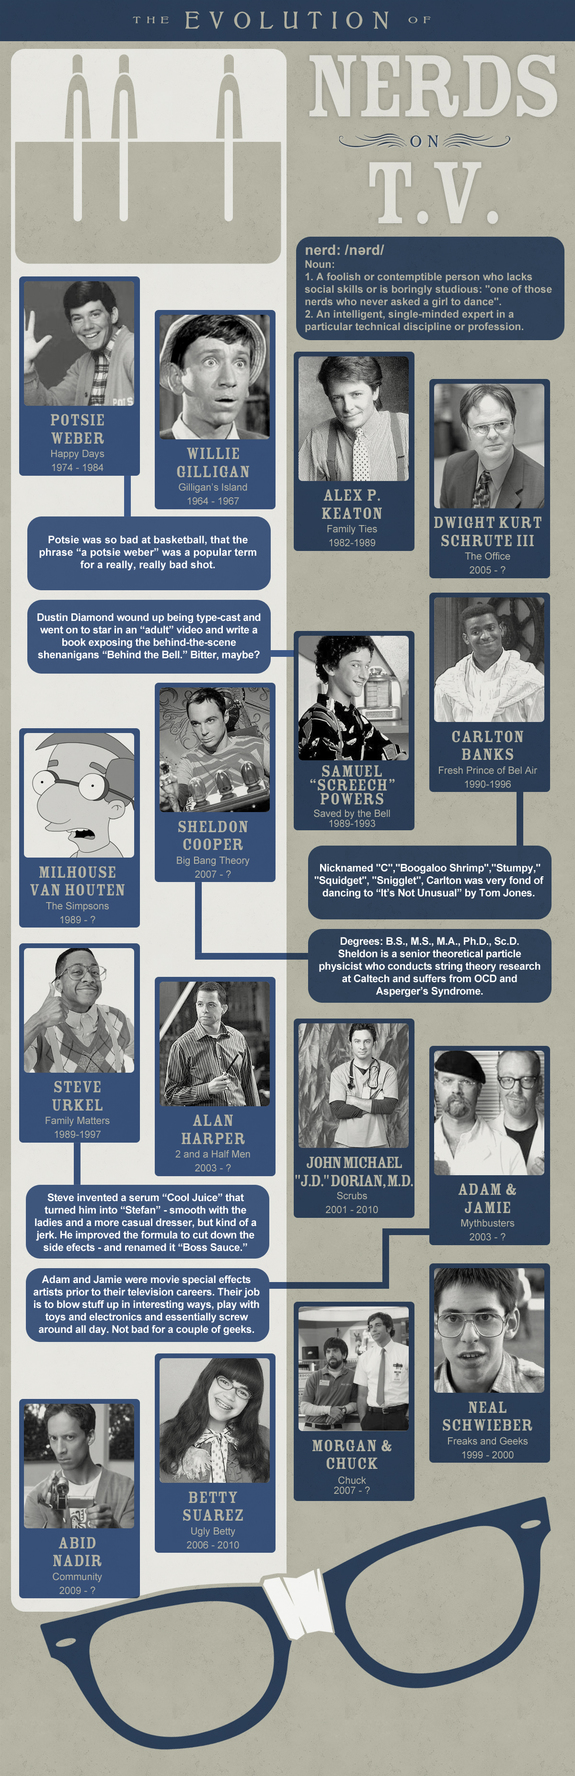 The Evolution of Nerds on TV infographic